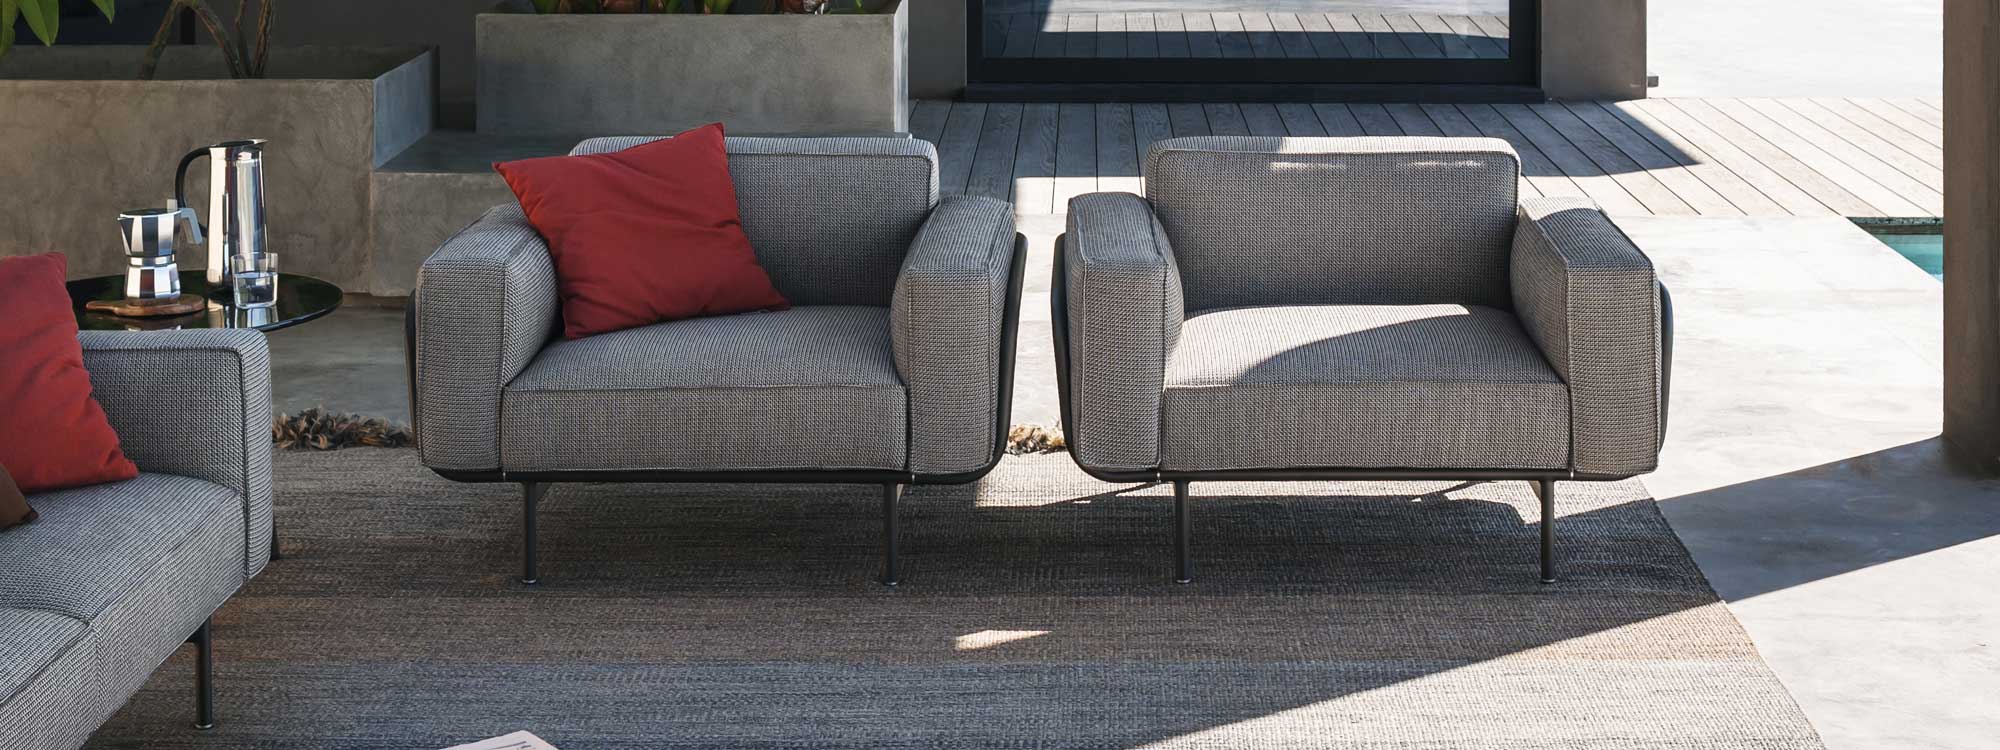 Image of pair of RODA Estendo linear garden lounge chairs on shady courtyard